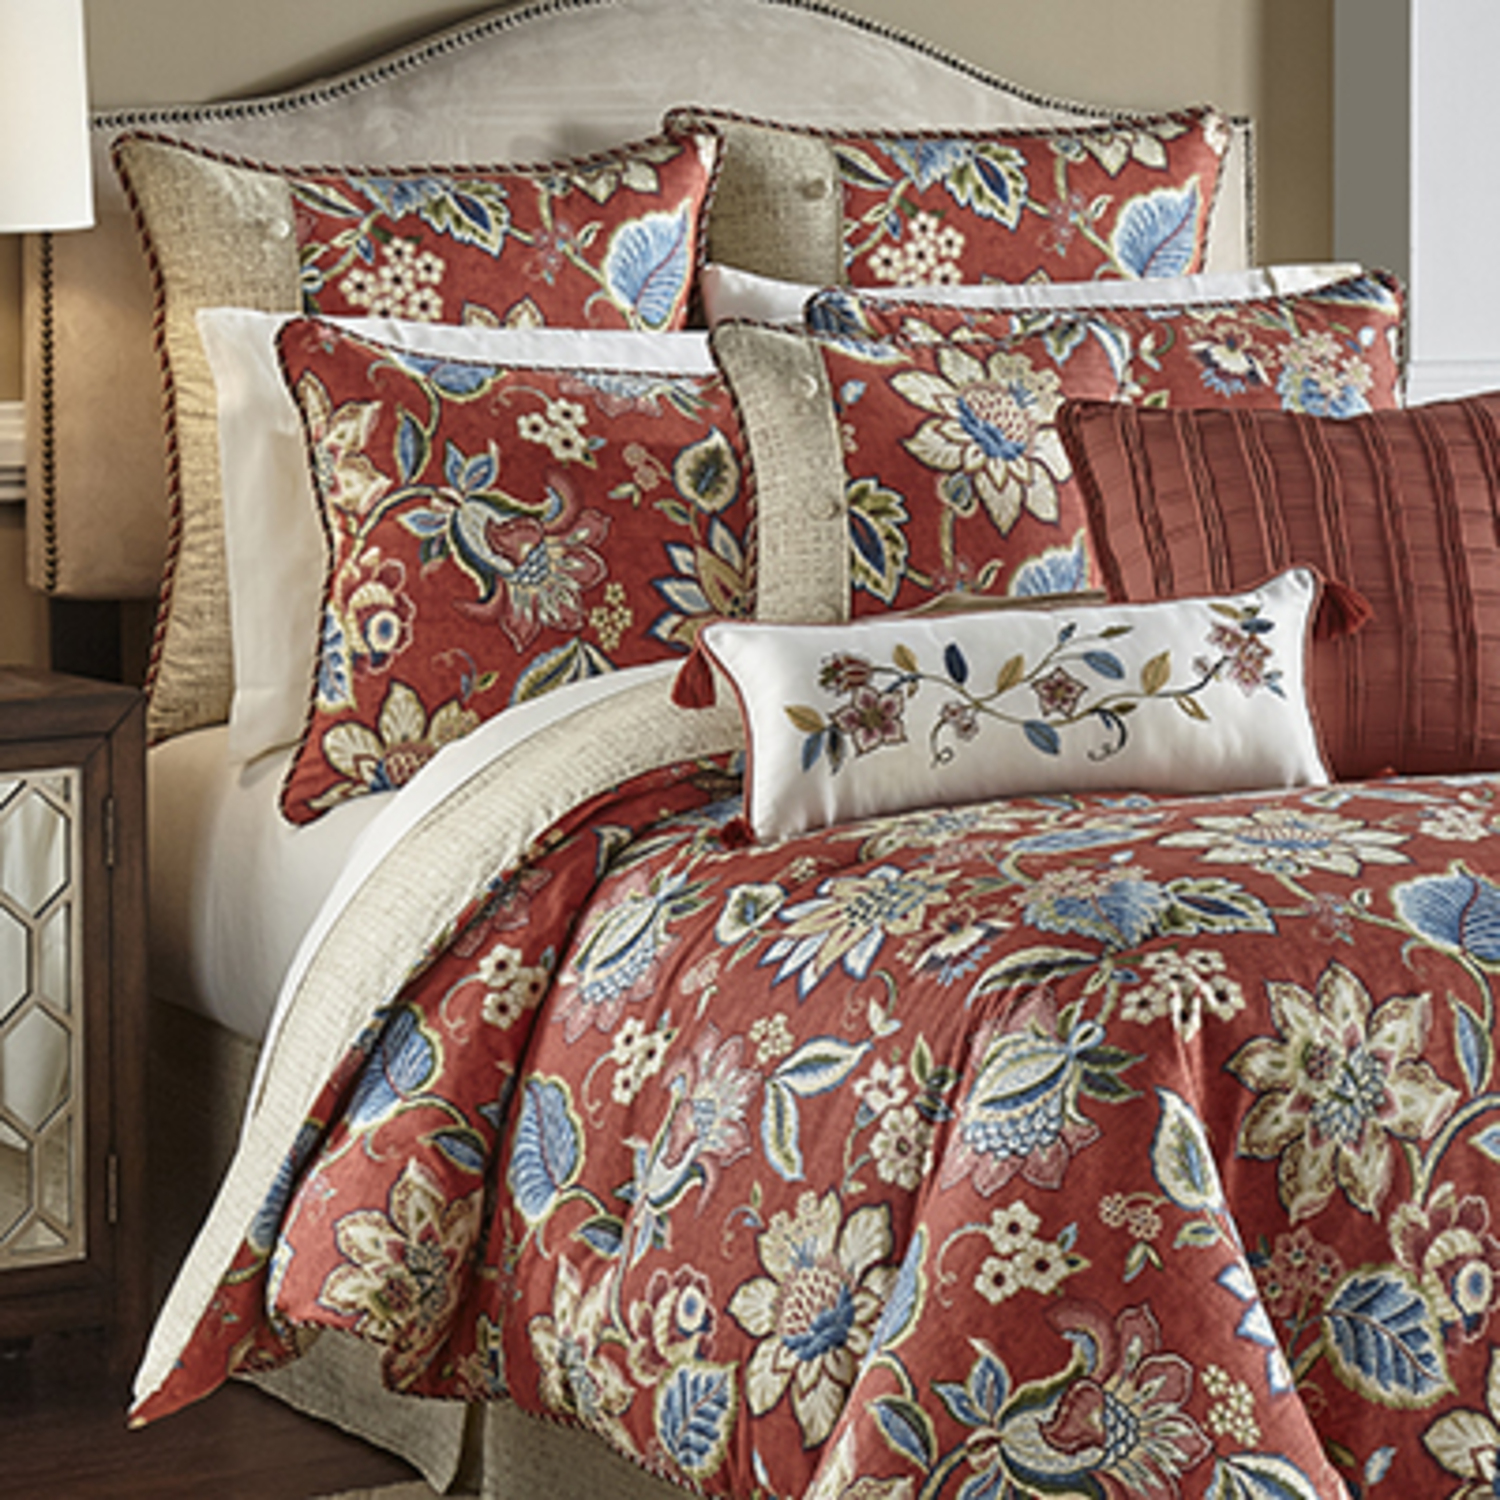 Brighton Blossom by Waverly Bedding Collection